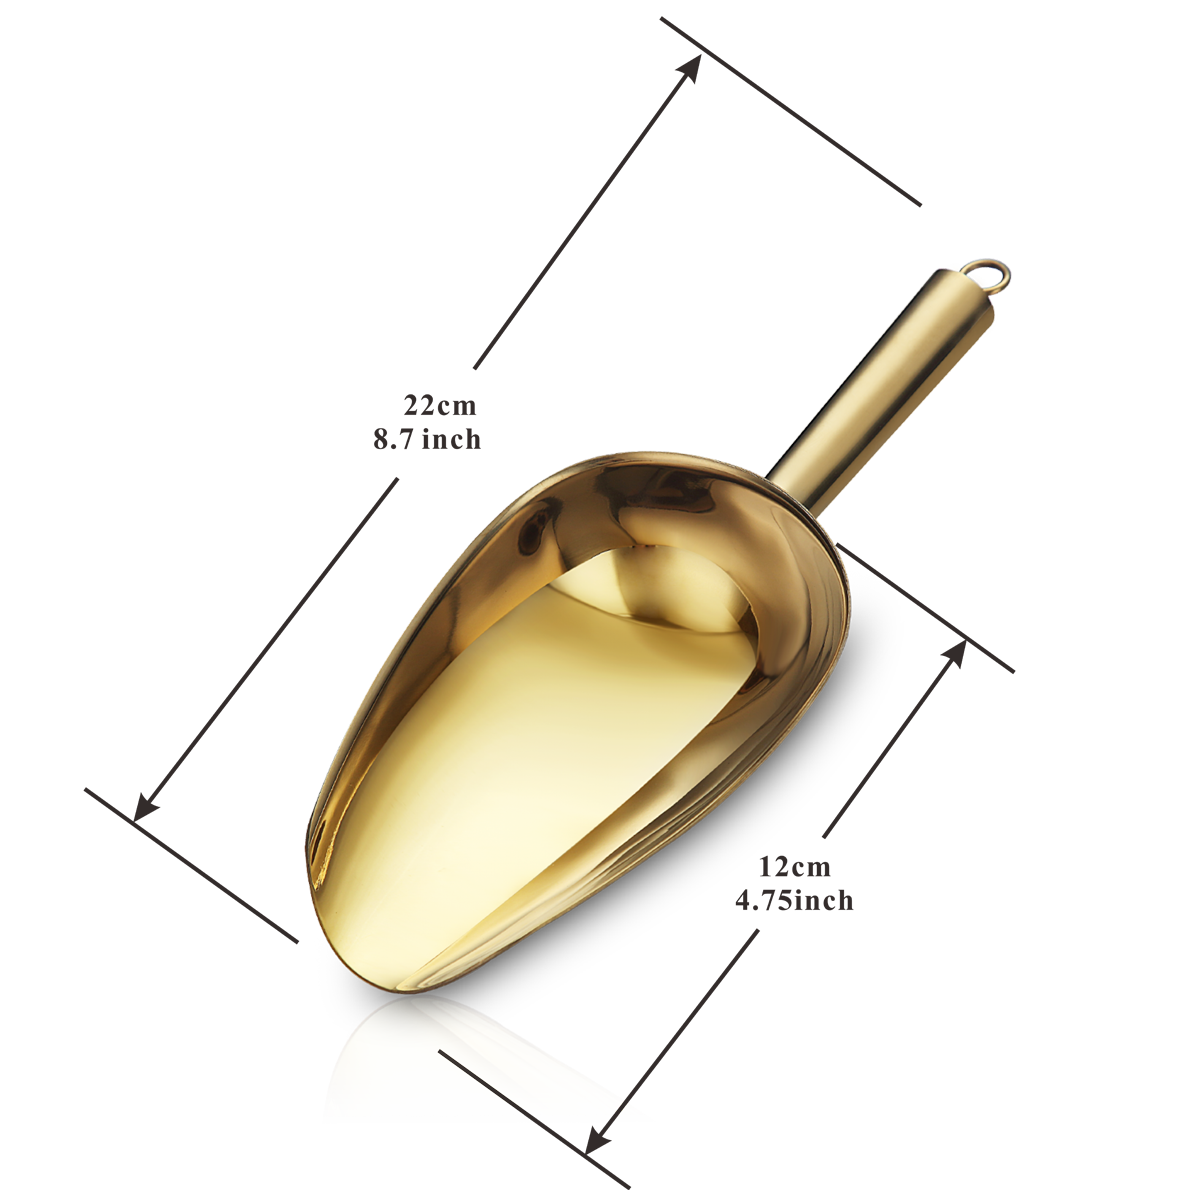 Gold Ice Cream Scoop, Berglander Stainless Steel Cookie Scoop Melon Baller  Scooper Cones With Titanium Gold Plating, Specialty Tools and Gadgets, Ice